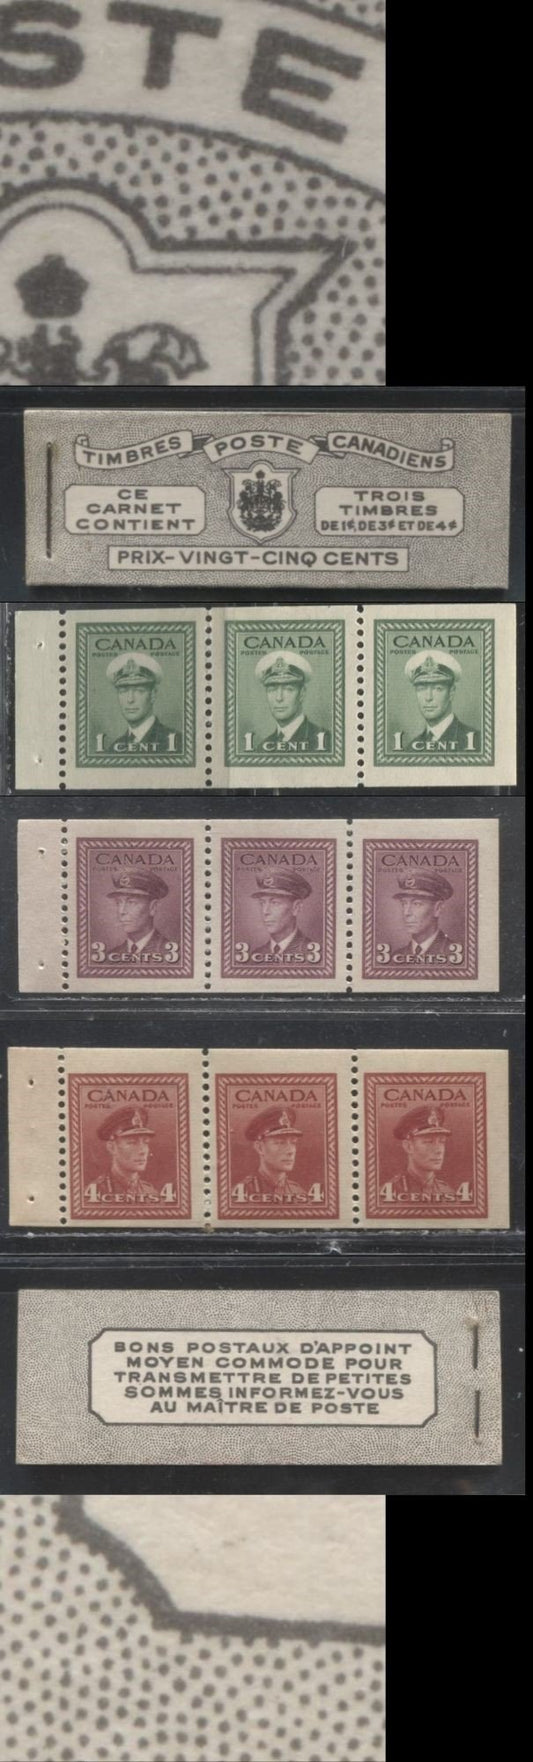 Lot 202 Canada #BK38a 1942-1949 War Issue Complete 25c, French Booklet Containing 1 Pane Each of 3 of 1c Green, 3c Rosy Plum and 4c Carmine Red, Harris Front Cover Type Vc , Back Cover Jvi, 7c & 6c Rate Page